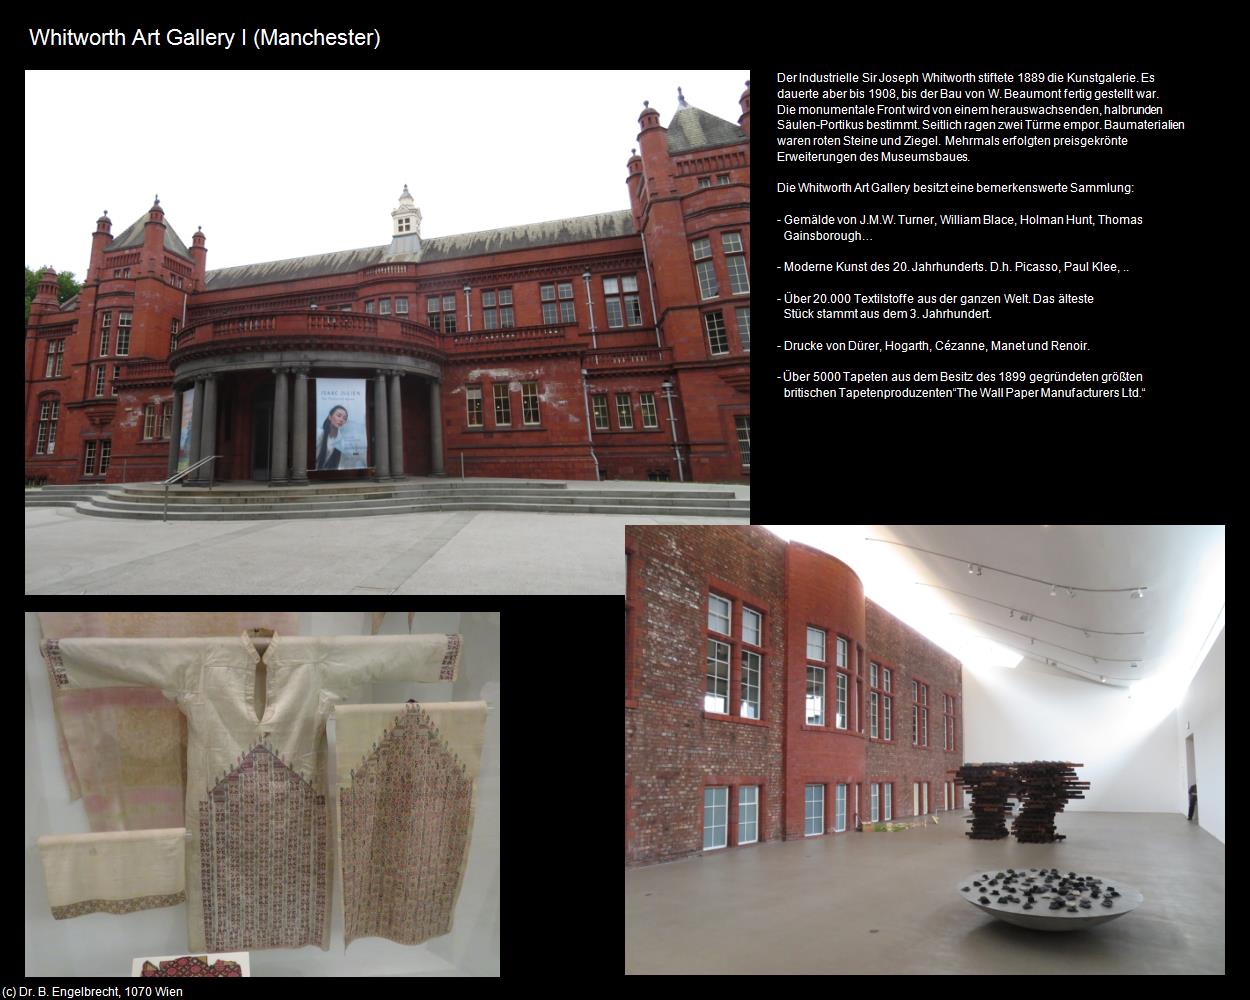 Whitworth Art Gallery I (Manchester, England  ) in Kulturatlas-ENGLAND und WALES